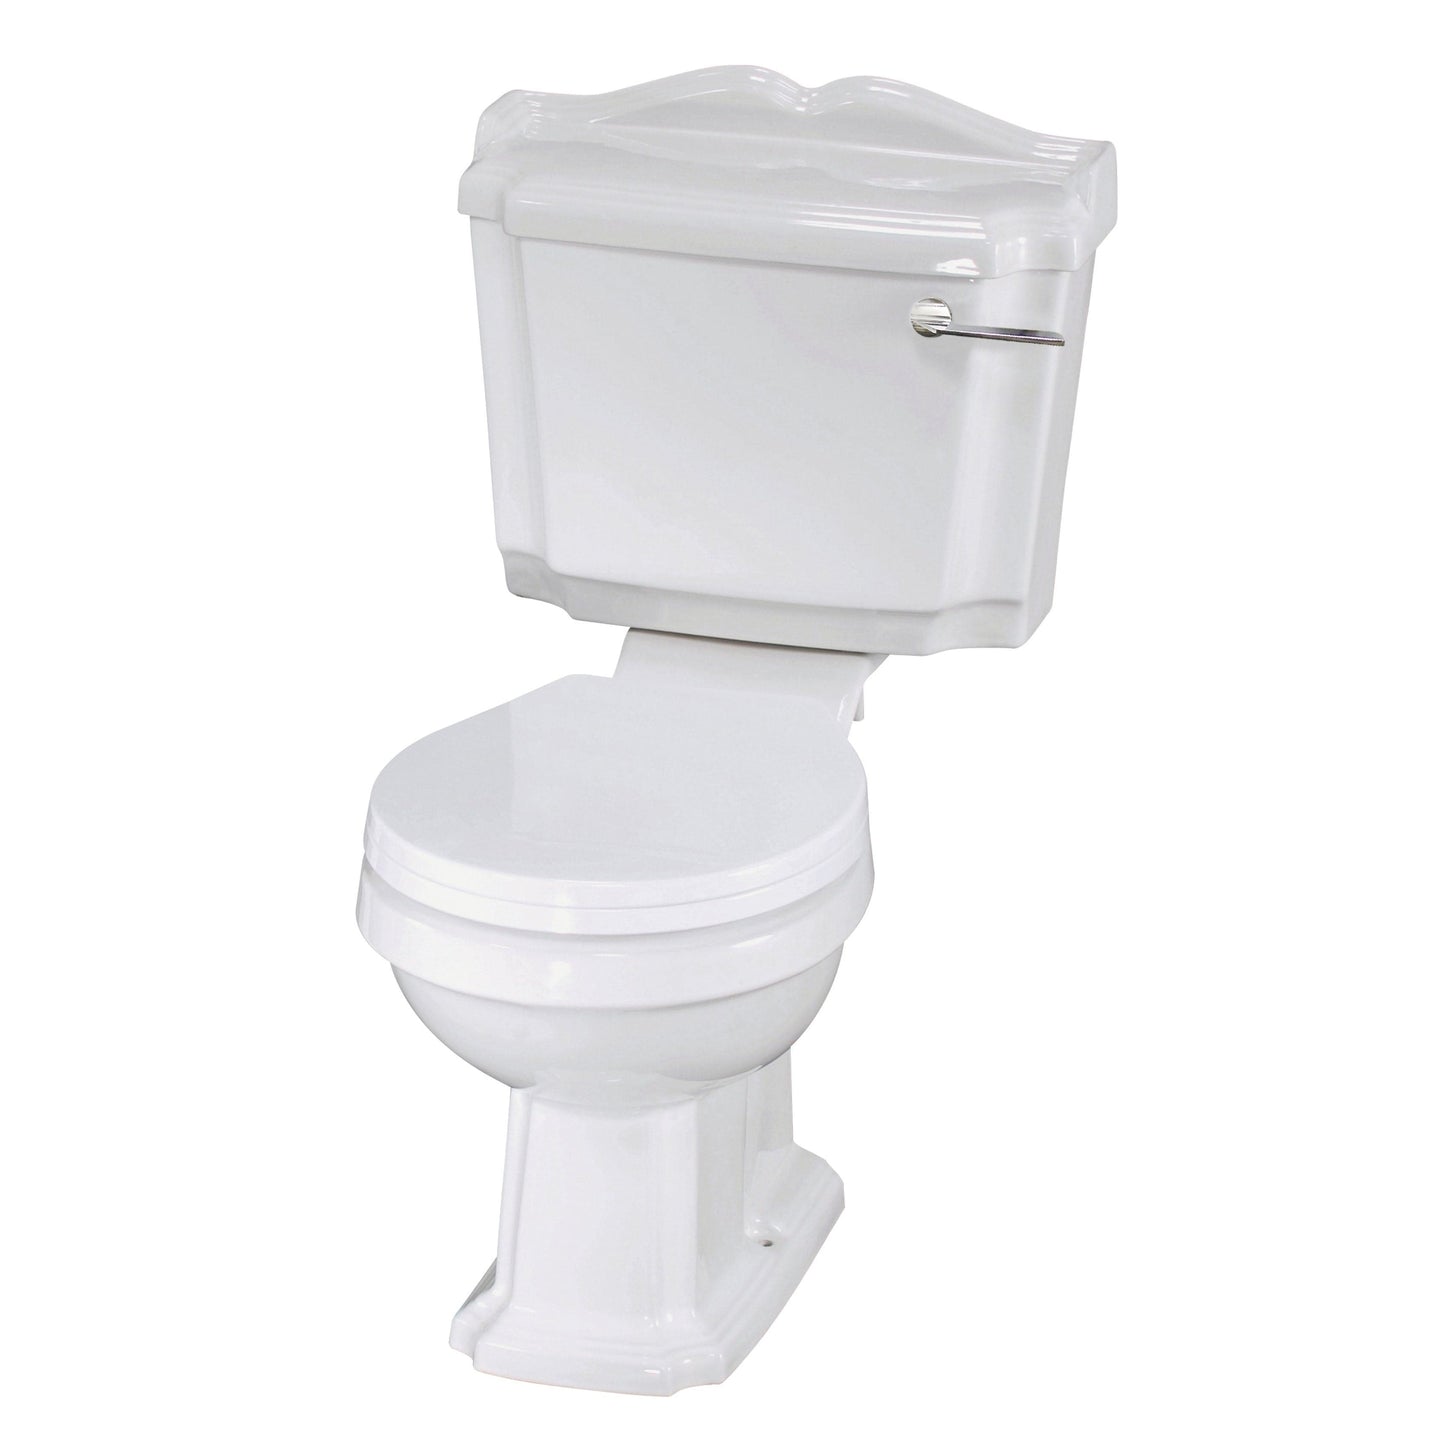 Bathroom4Less Elizabeth Close Coupled Toilet With Cistern And Soft Closing Seat